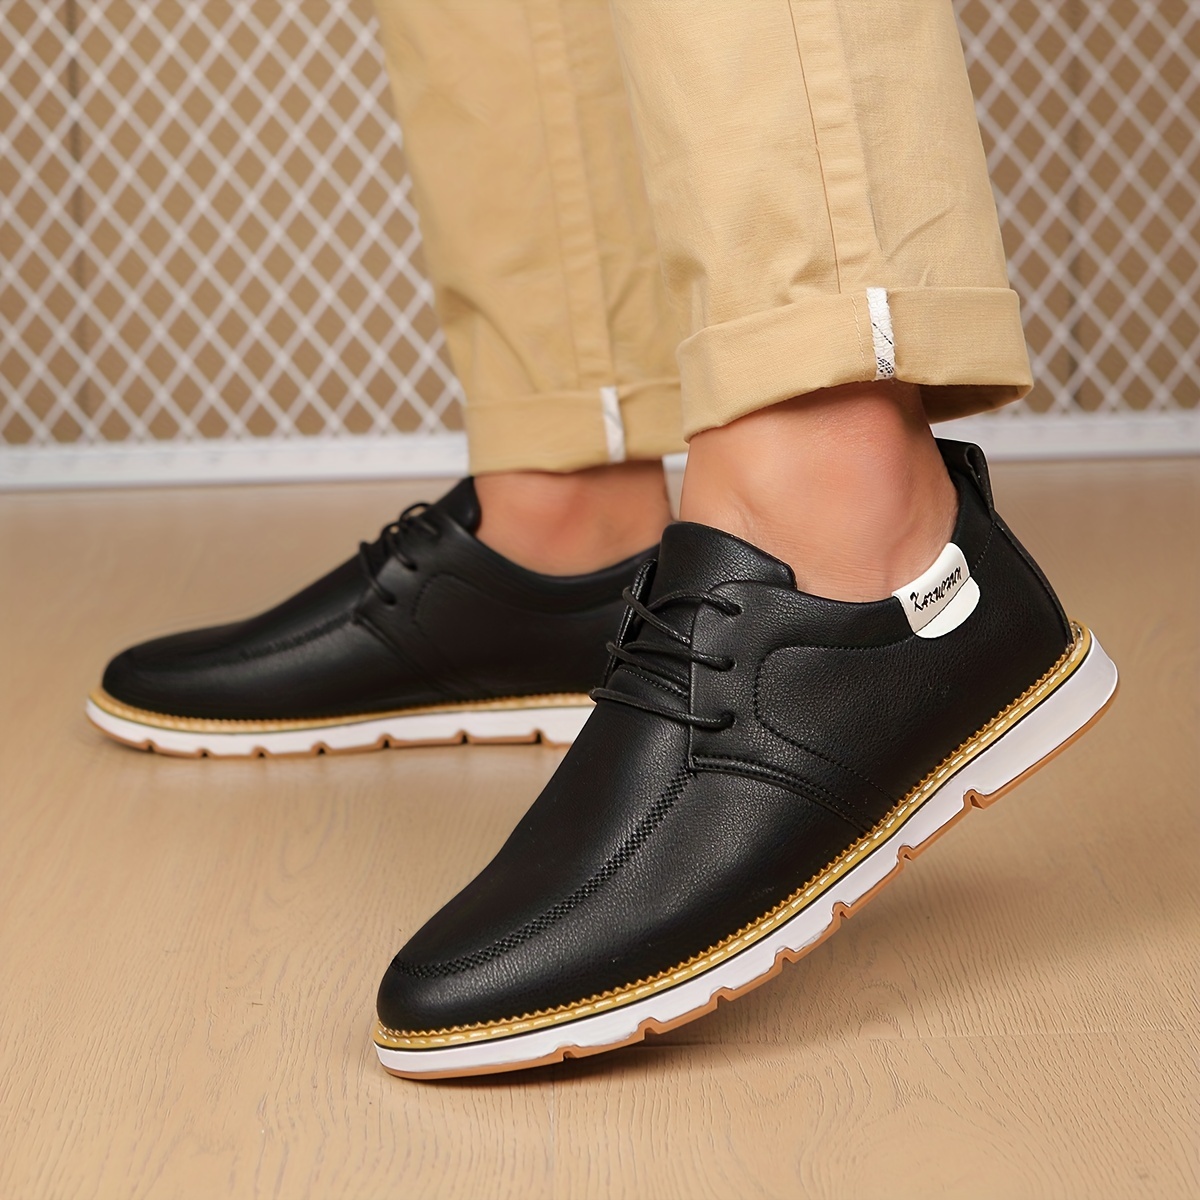 Top 7 Must-Have Formal Shoes For Men